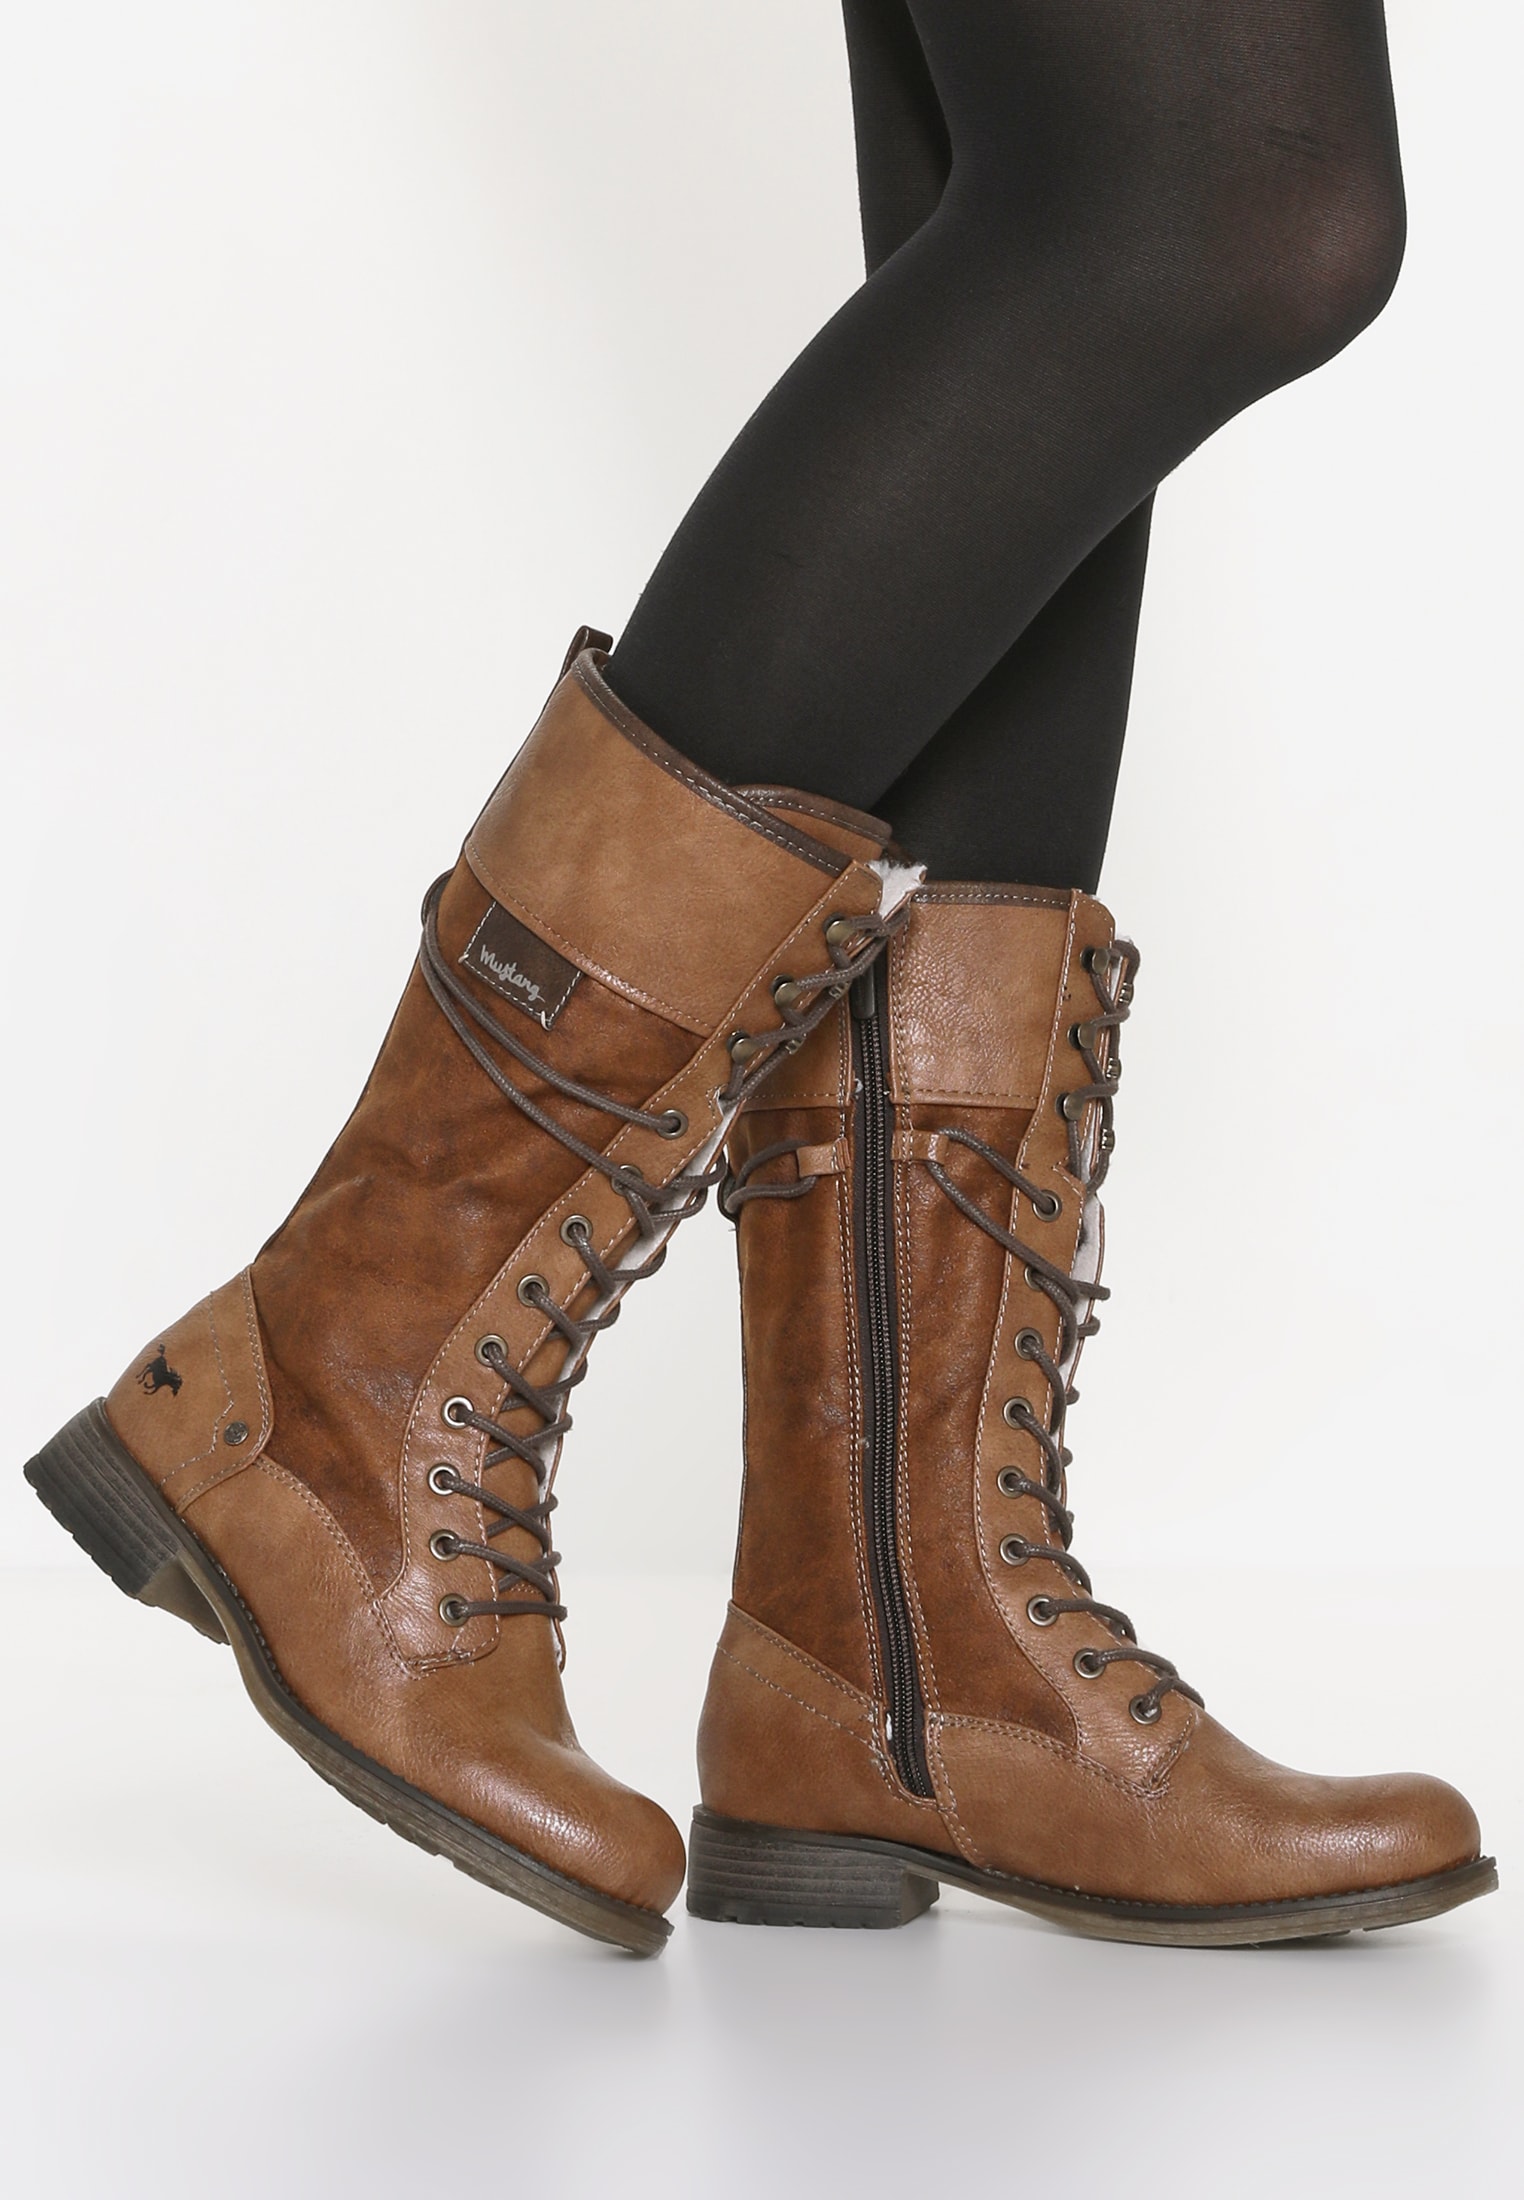 Practical winter boots for teens